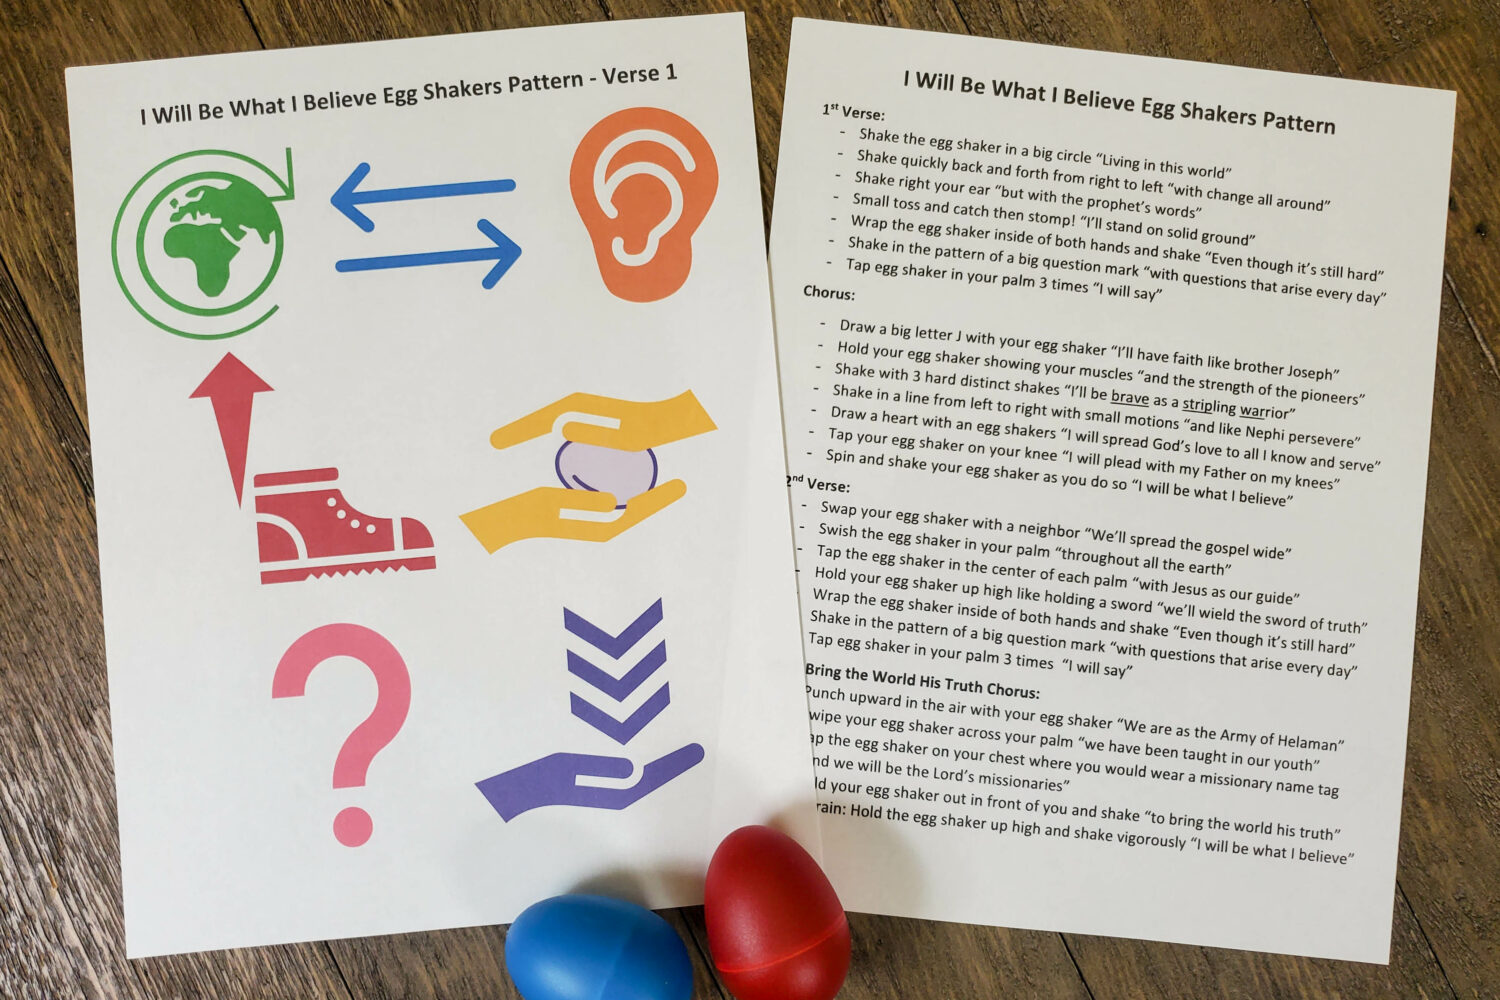 I Will Be What I Believe Egg Shakers singing time activity - shake along with a unique pattern for each line of the song to help teach the words while you add in fun movement! Find these printable song helps and lesson plan for LDS Primary music leaders here.